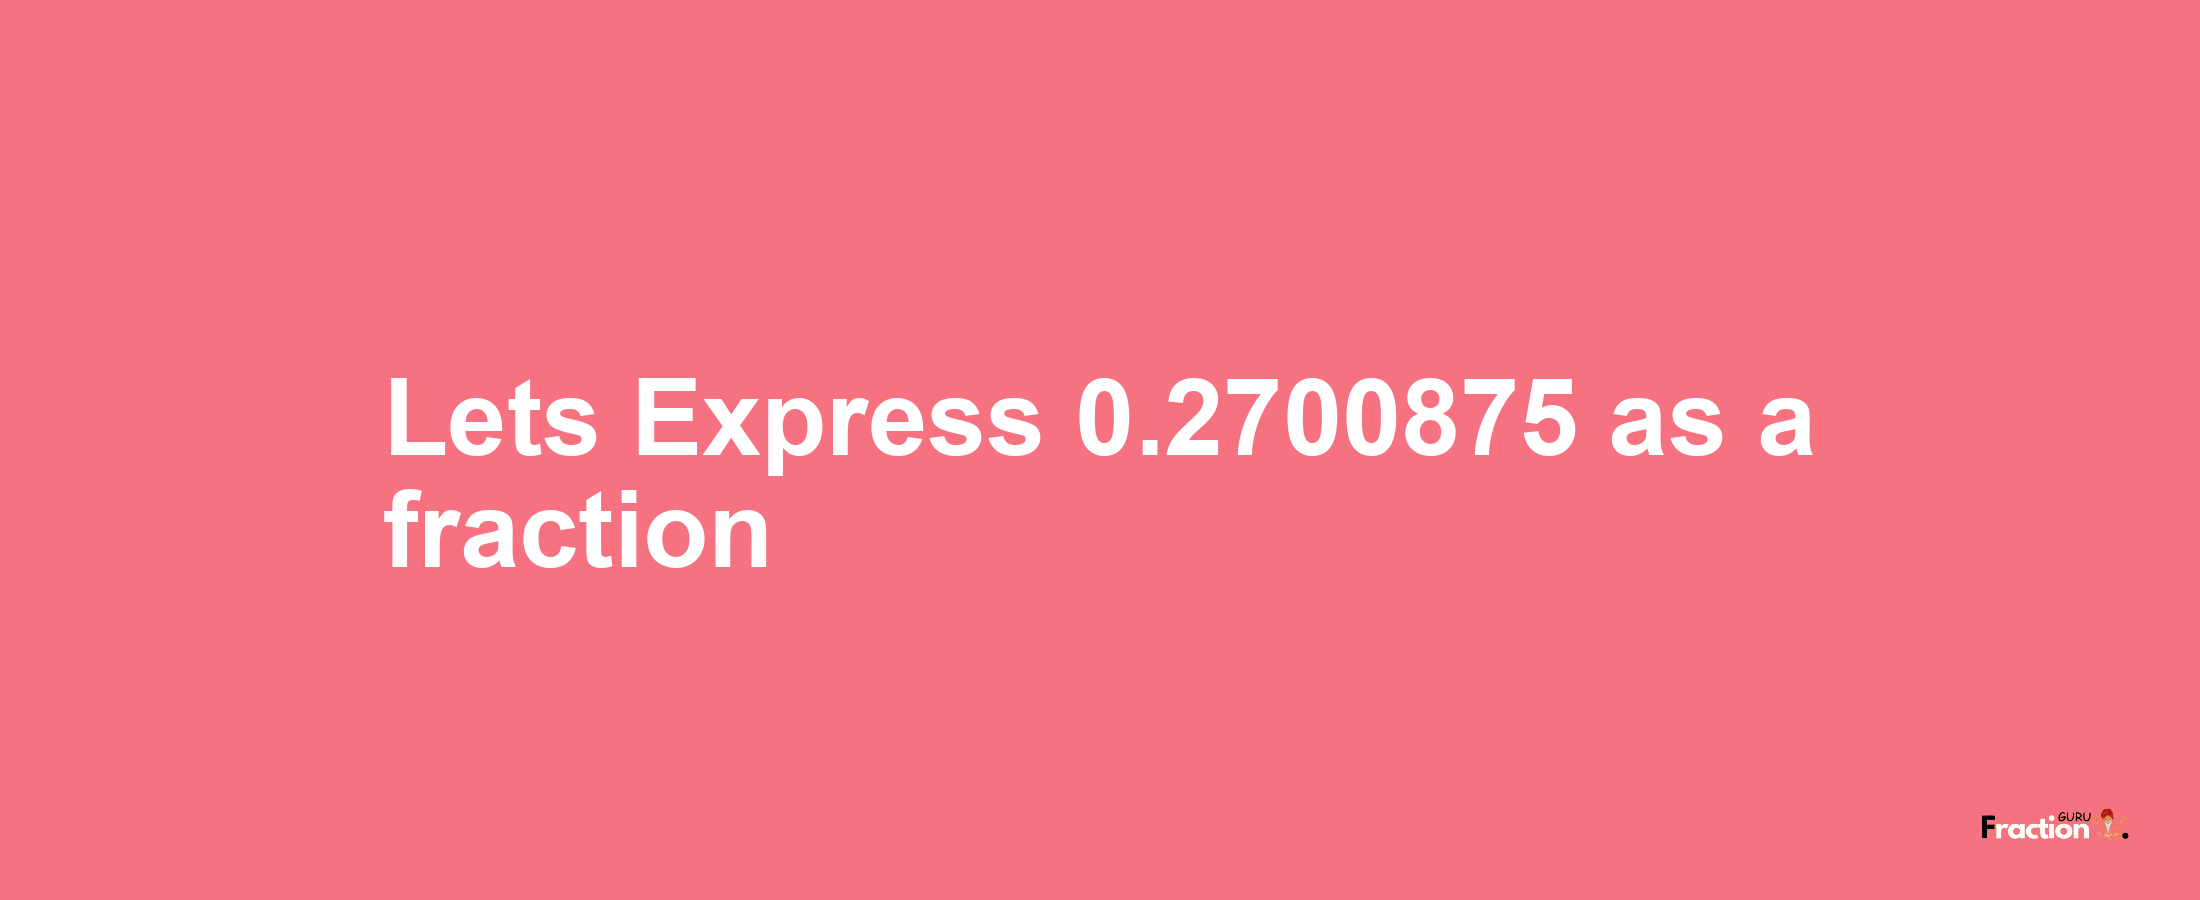 Lets Express 0.2700875 as afraction